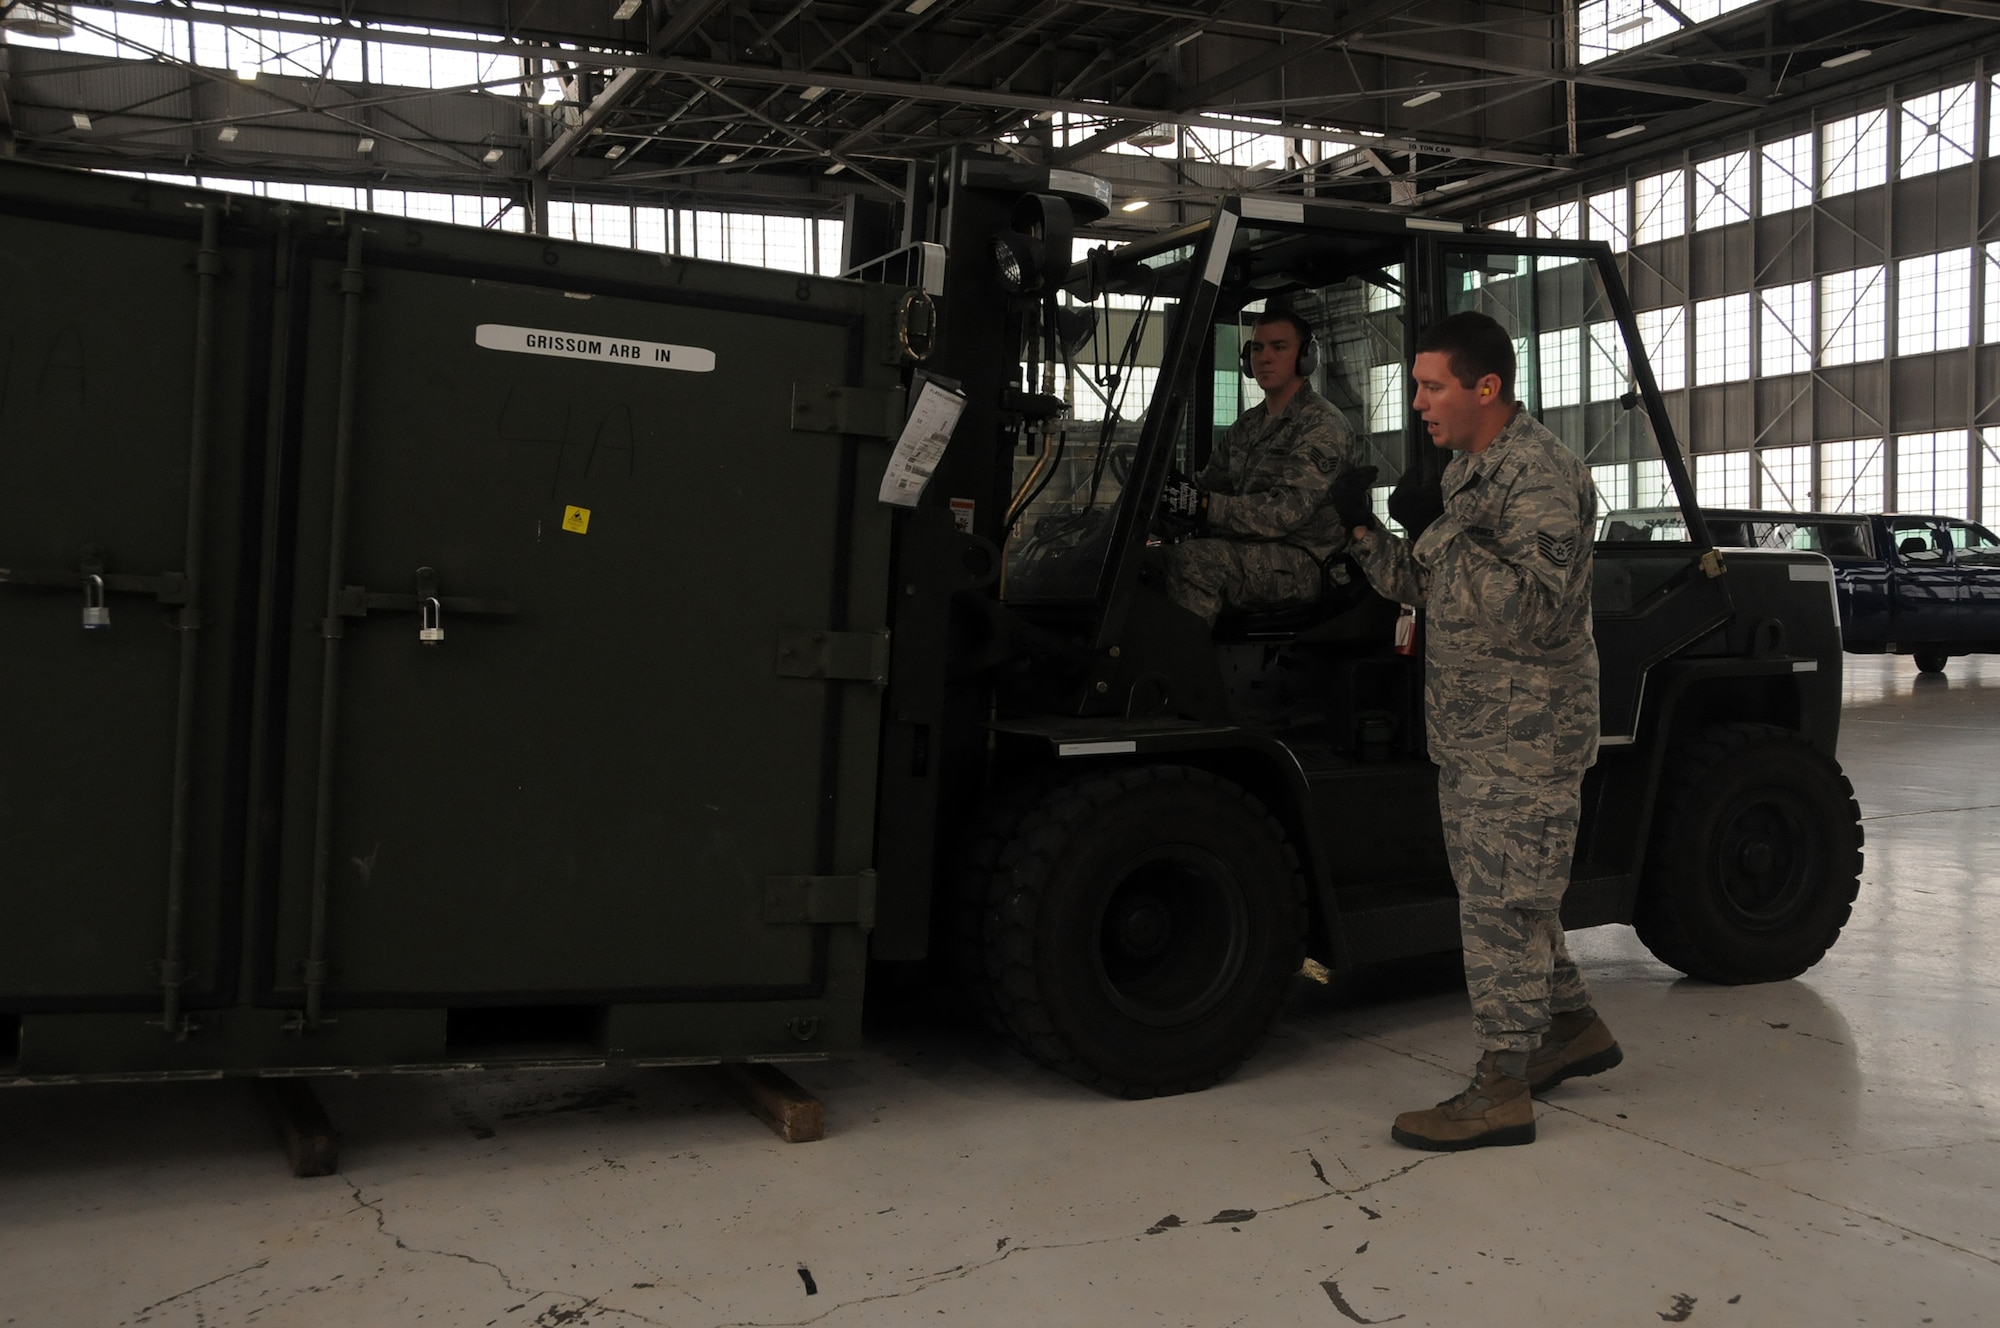 WRIGHT-PATTERSON AIR FORCE BASE, Ohio – Forklift operator, Staff Sgt. Thomas Kocin, receives commands from Tech. Sgt. Matthew Foster in moving a shipping container during pallet build training July 19, 2014. Both are assigned to the 87th Aerial Port Squadron.  (U.S. Air Force photo/Tech. Sgt. Anthony G. Springer)